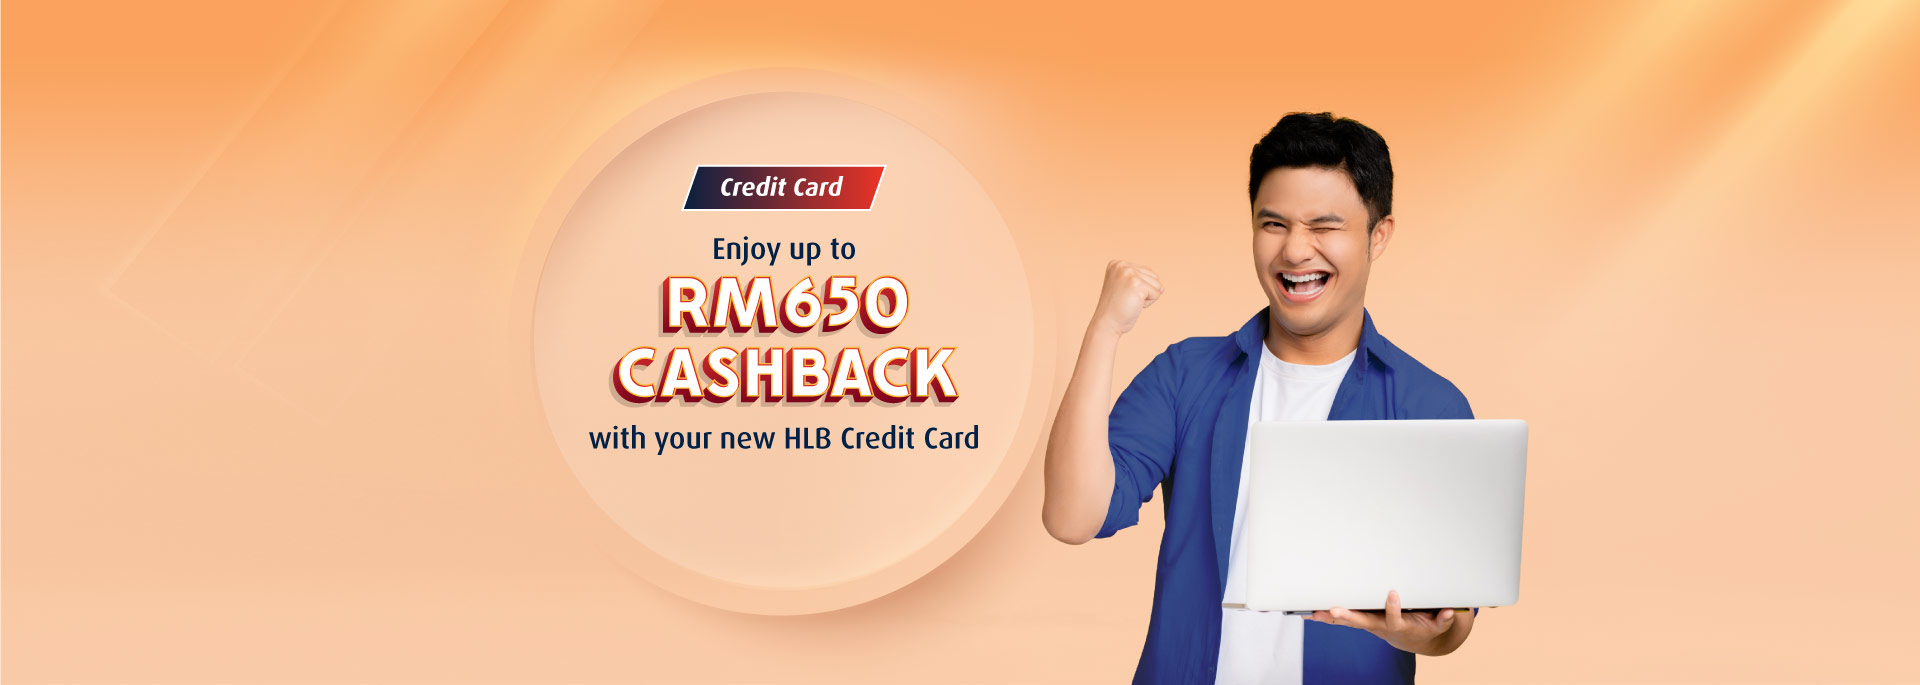 Get up to RM650 Cashback with your new HLB Credit Card